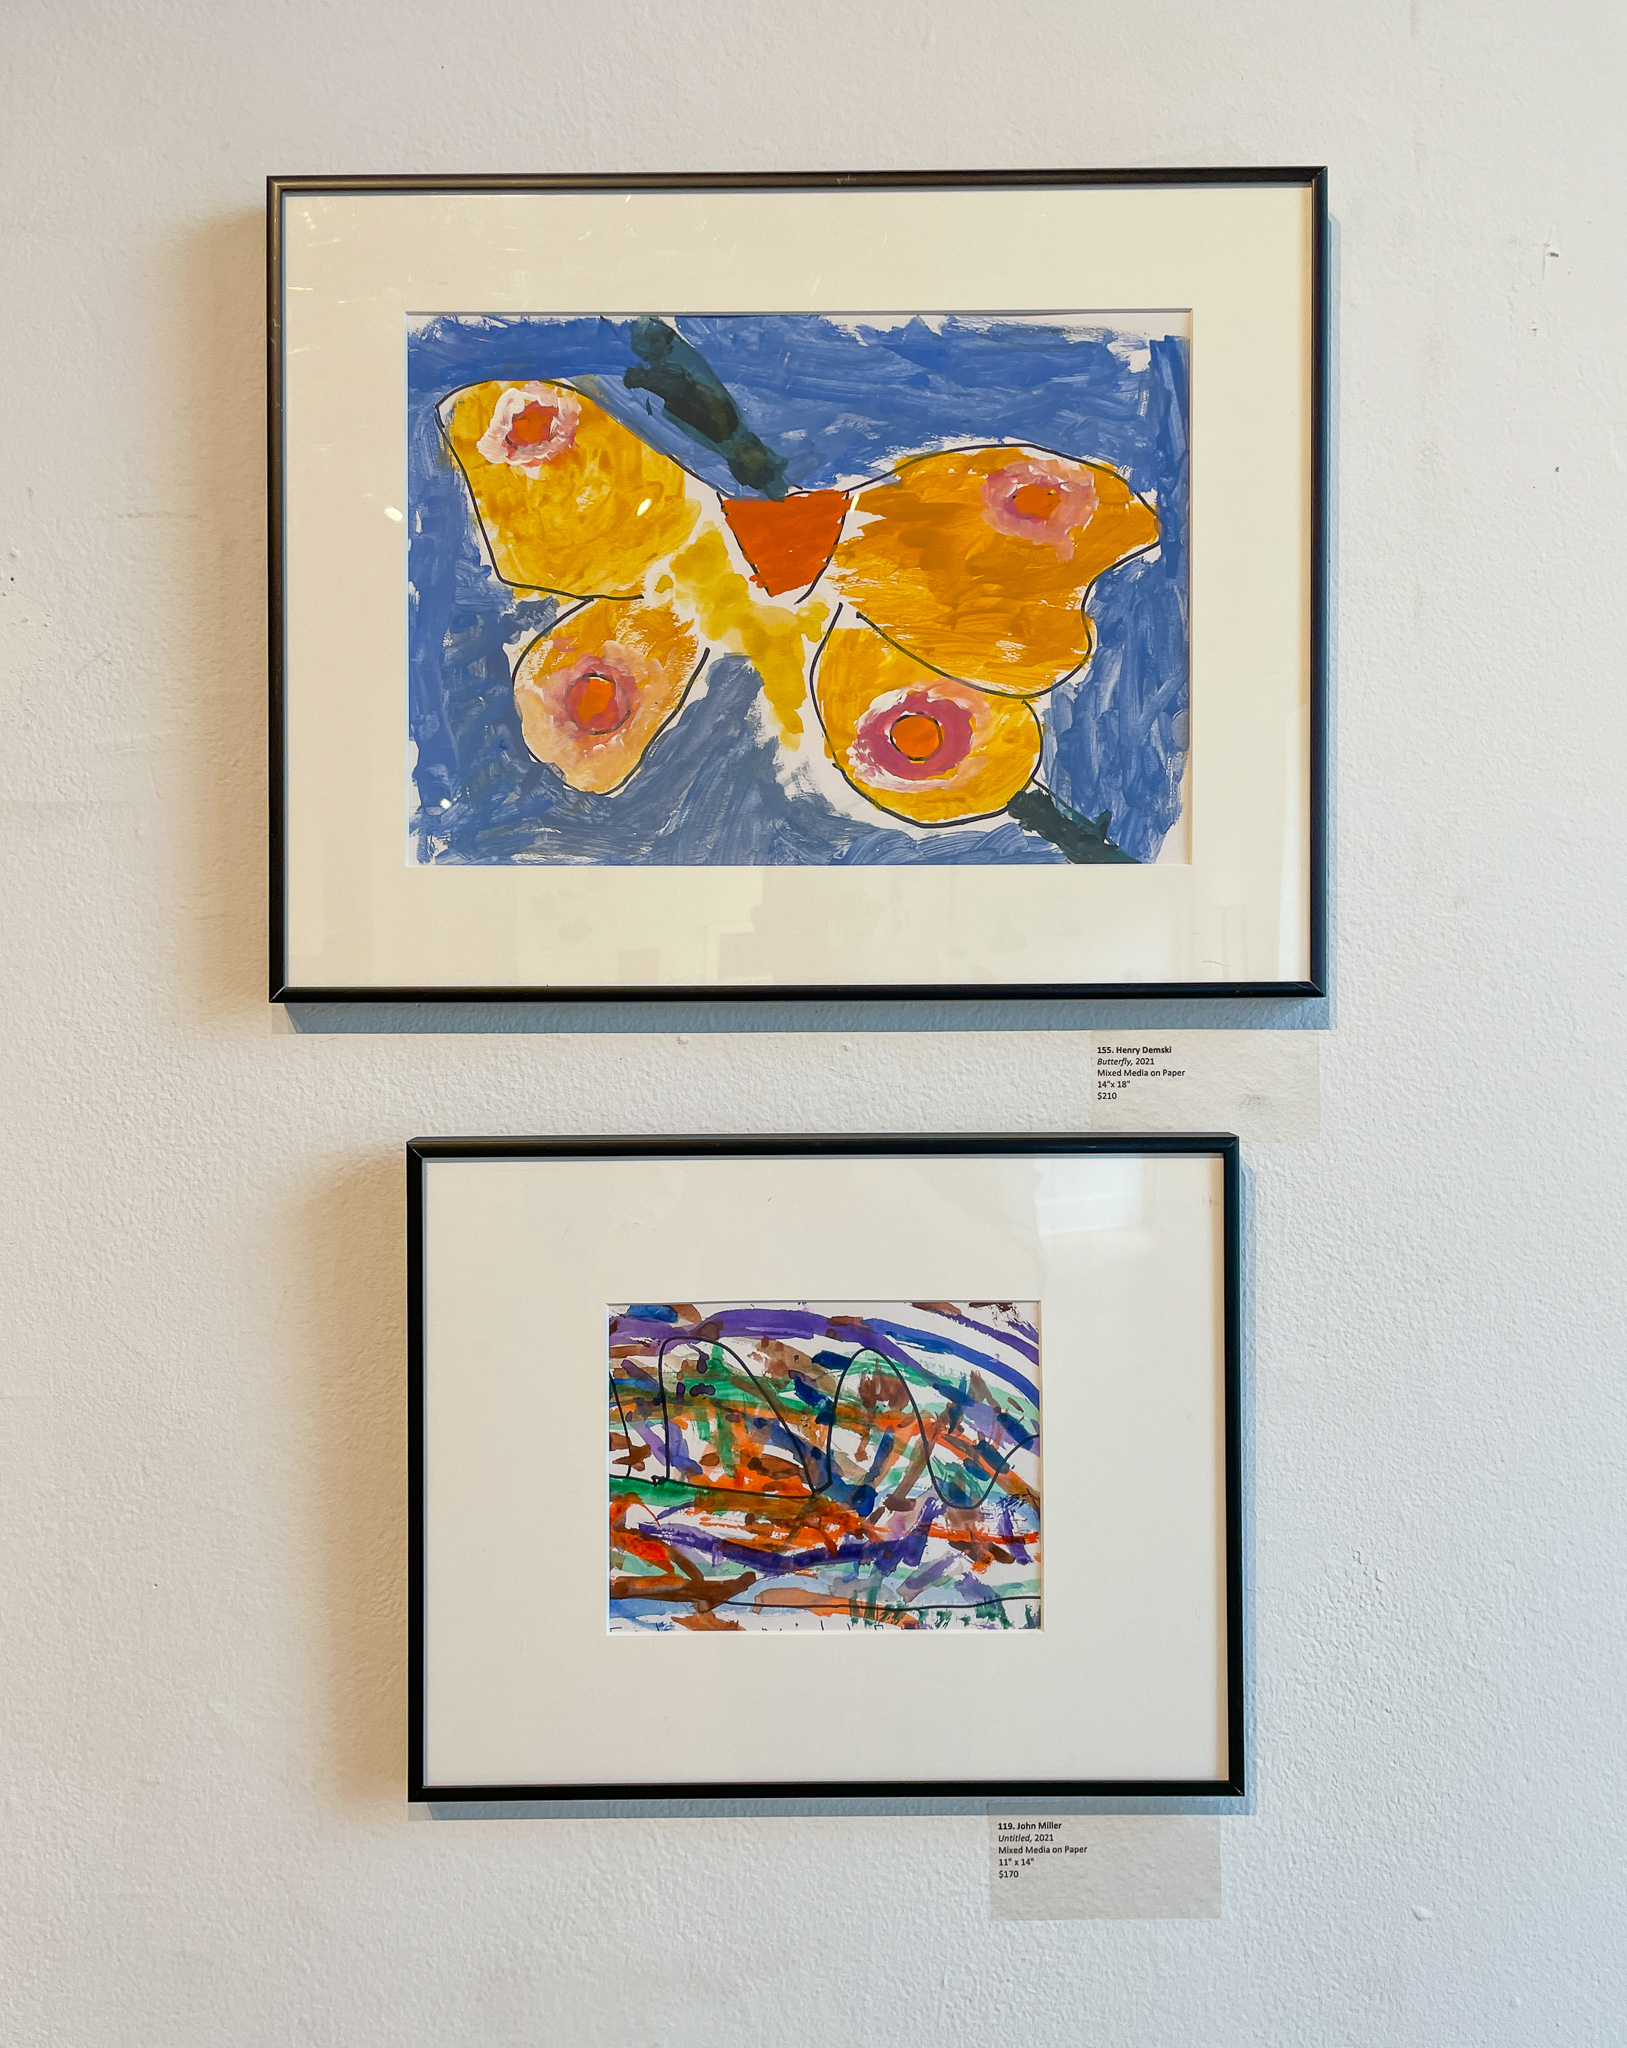 Gallery wall with two painting, one a large butterfly and the other an abstract painting